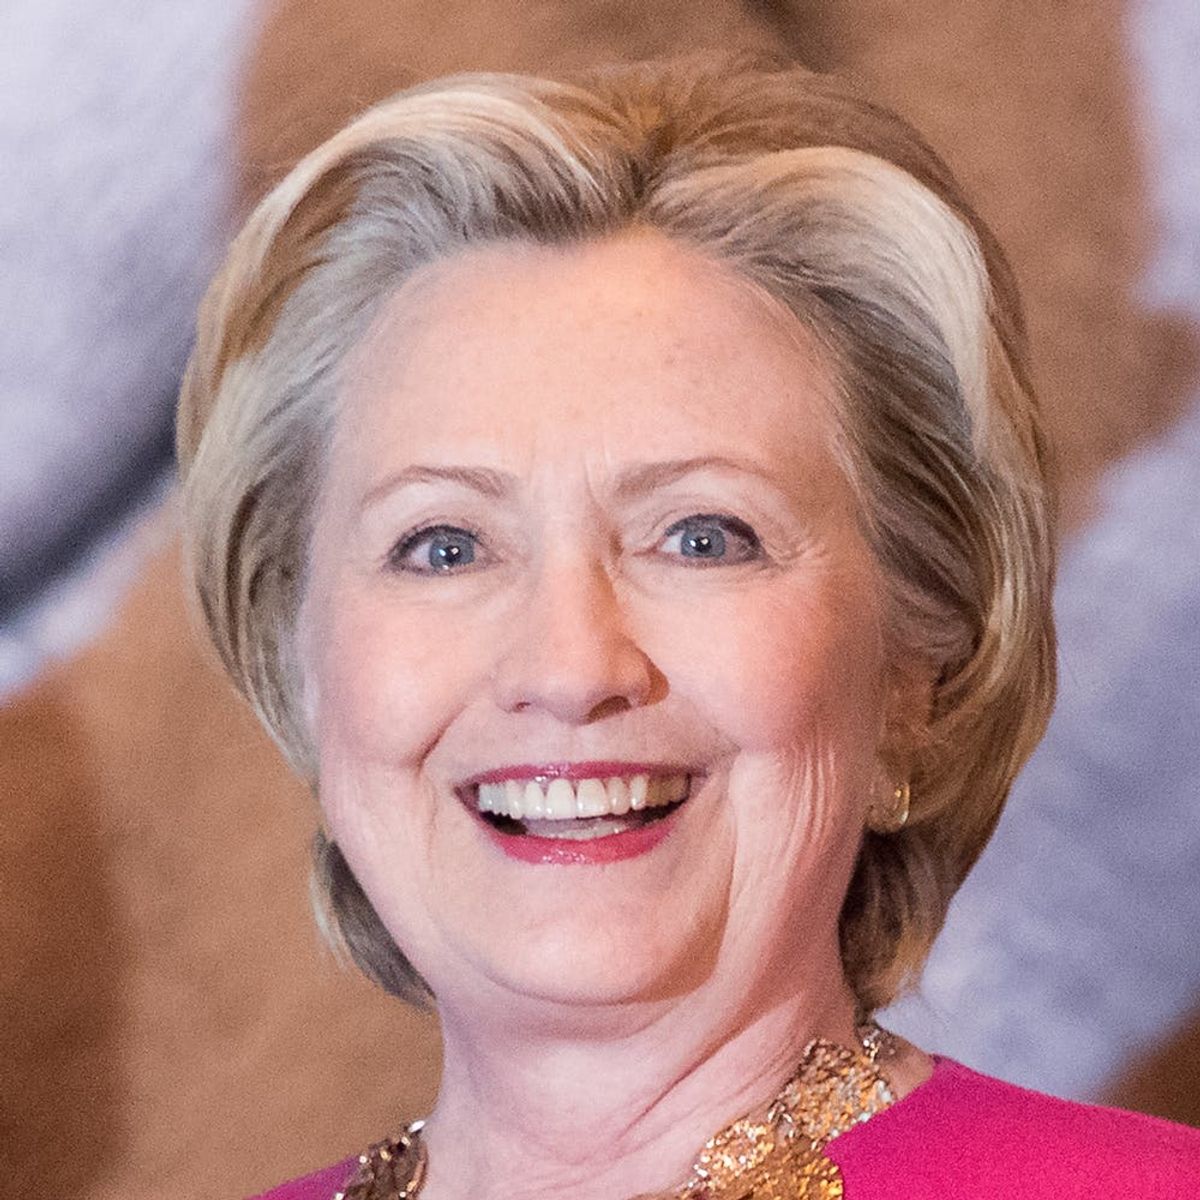 Hillary Clinton Talks About That Infamous Cold-Shoulder Dress from the ’90s